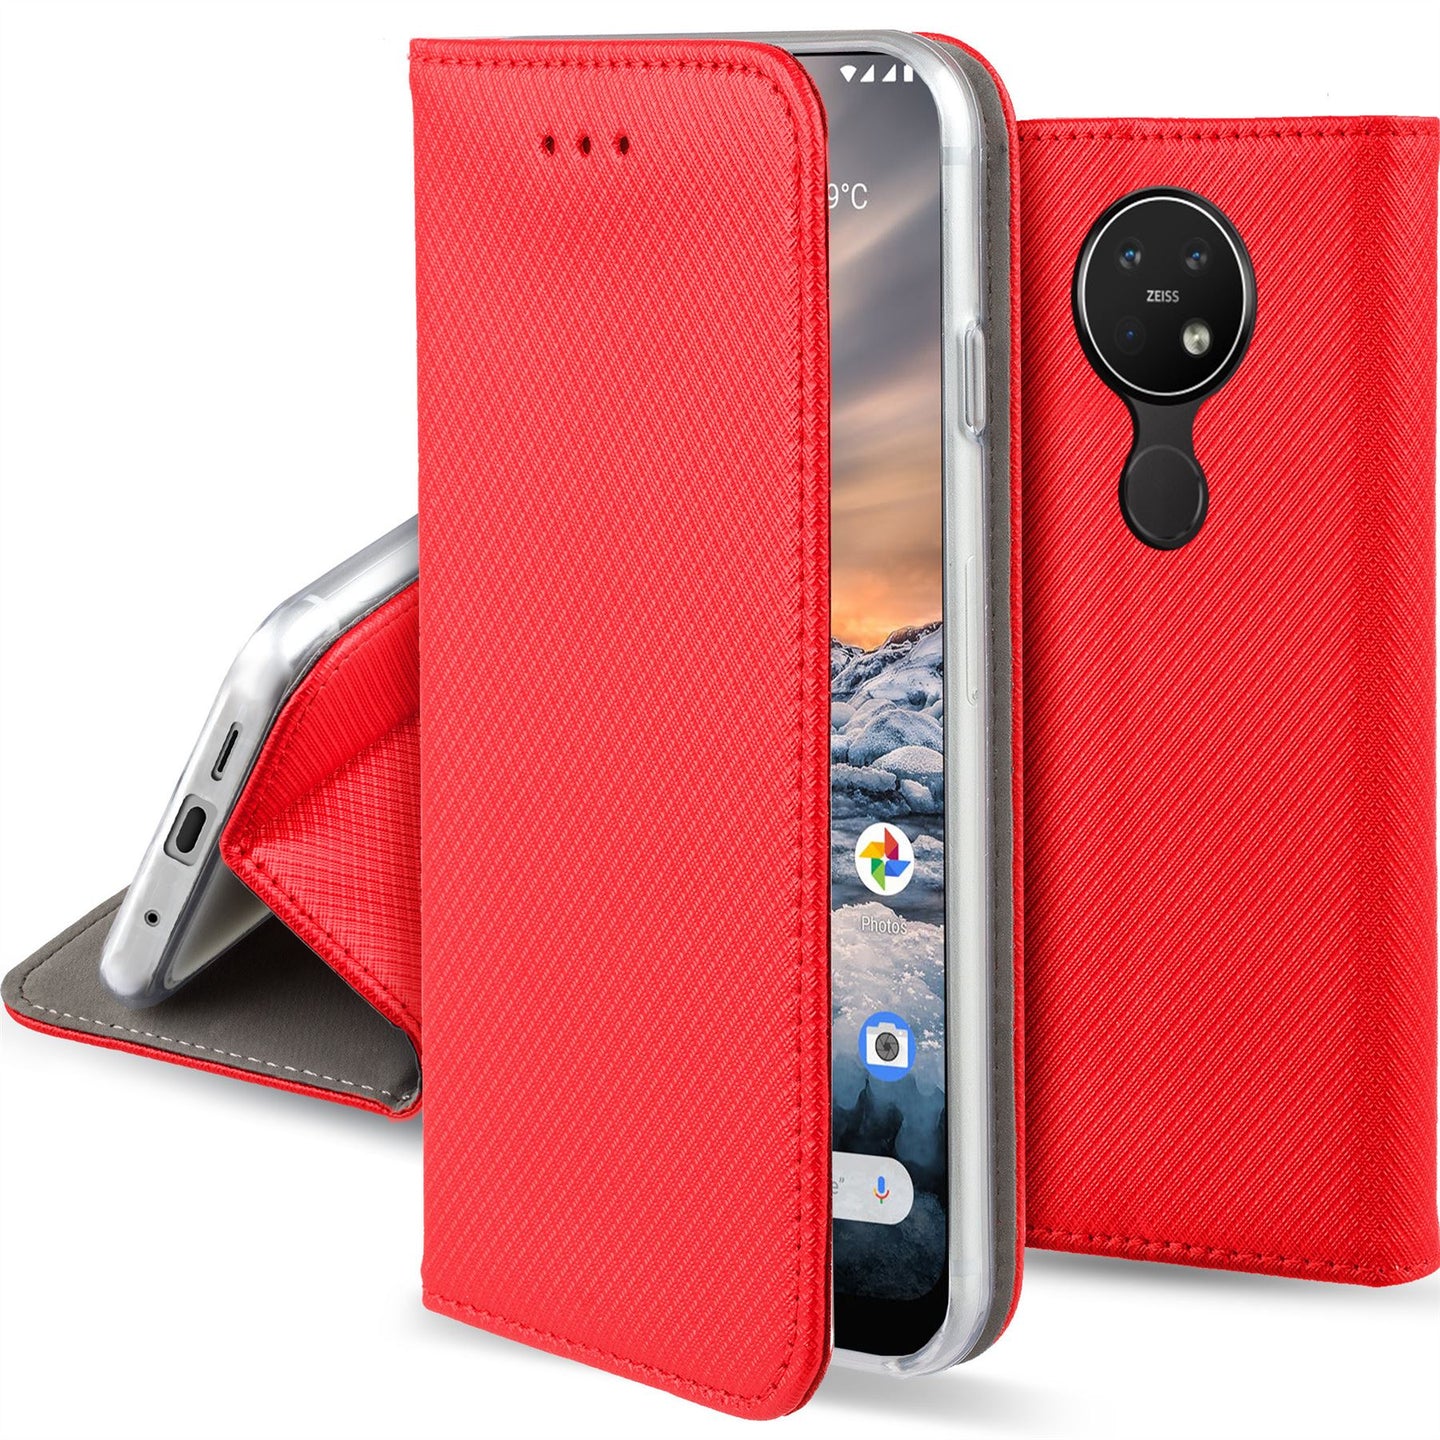 Moozy Case Flip Cover for Nokia 7.2, Nokia 6.2, Red - Smart Magnetic Flip Case with Card Holder and Stand